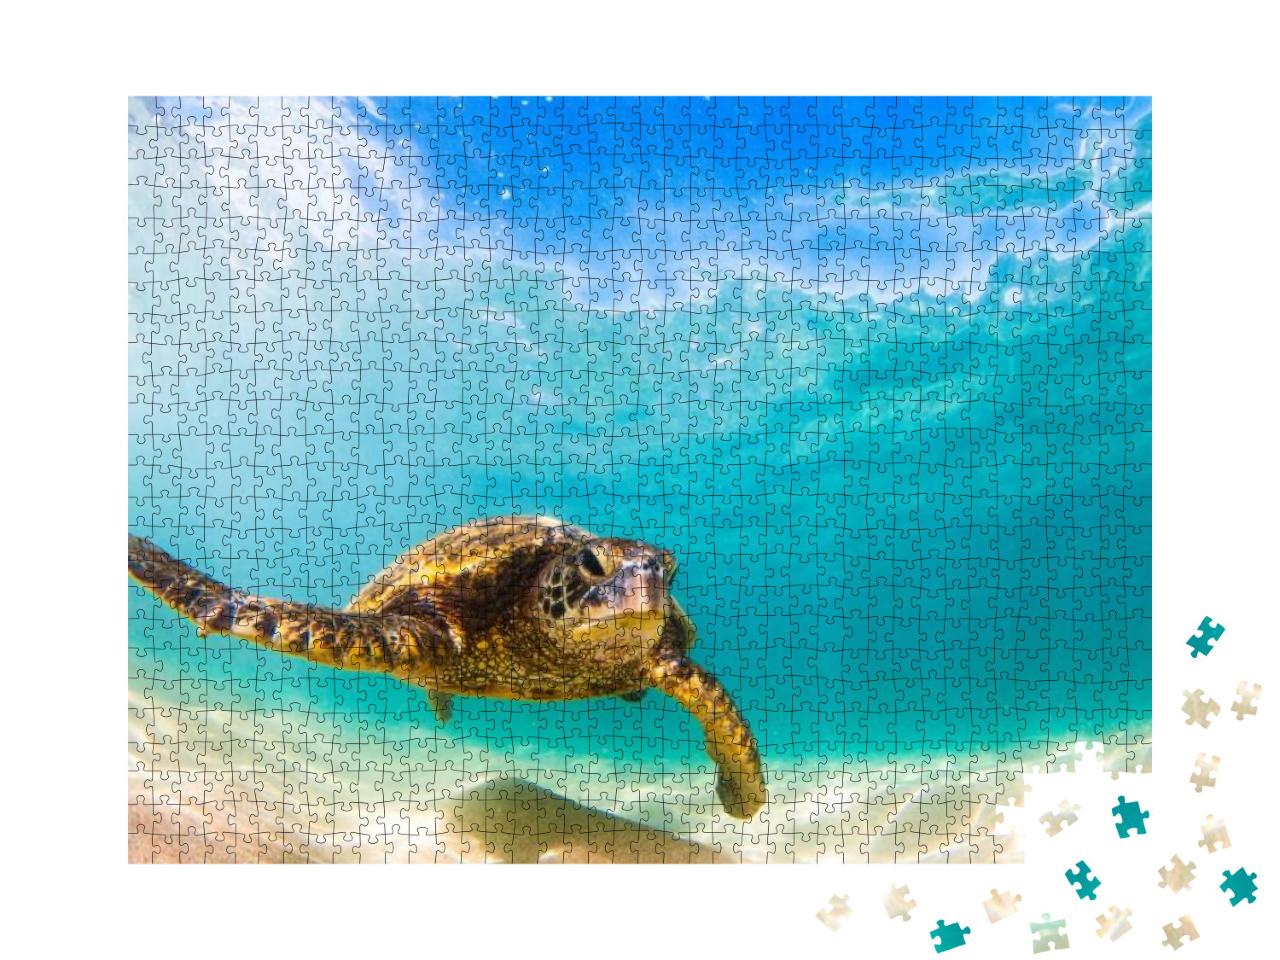 Hawaiian Green Sea Turtle Cruising in the Warm Waters of... Jigsaw Puzzle with 1000 pieces